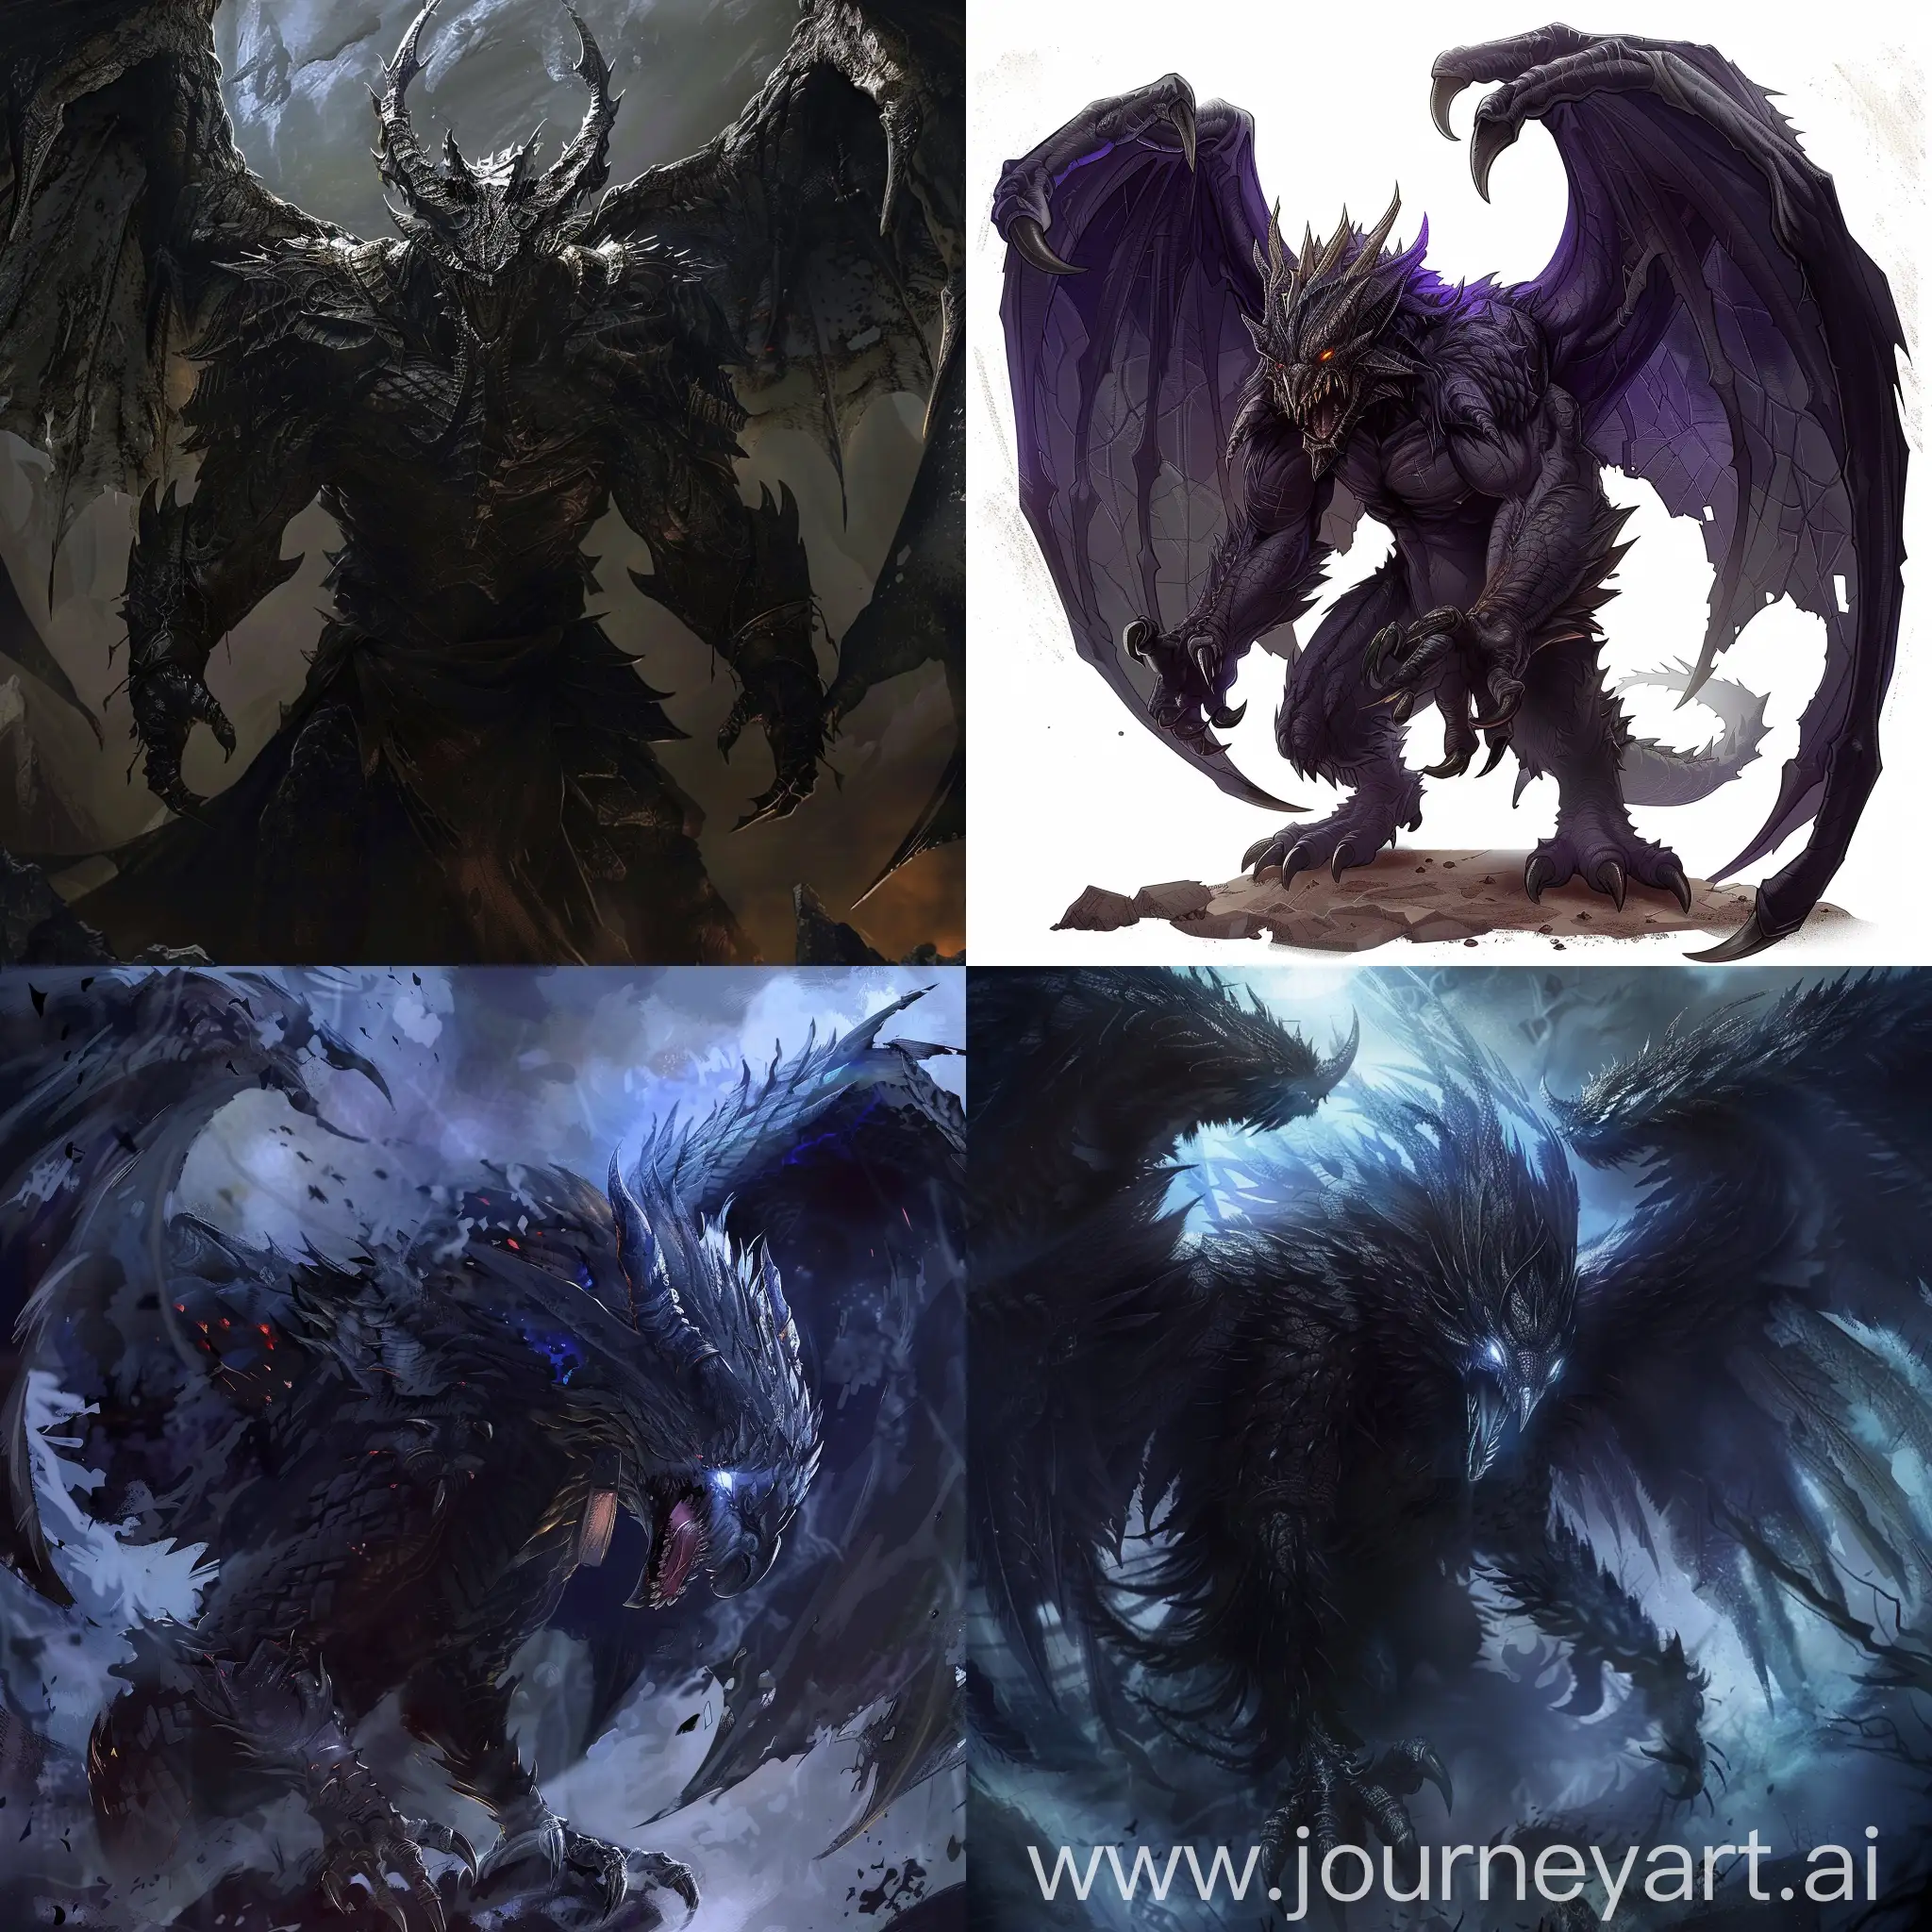 Sinister-Monster-Morgan-Blackwing-with-Dark-Scaly-Wings-and-Menacing-Runes